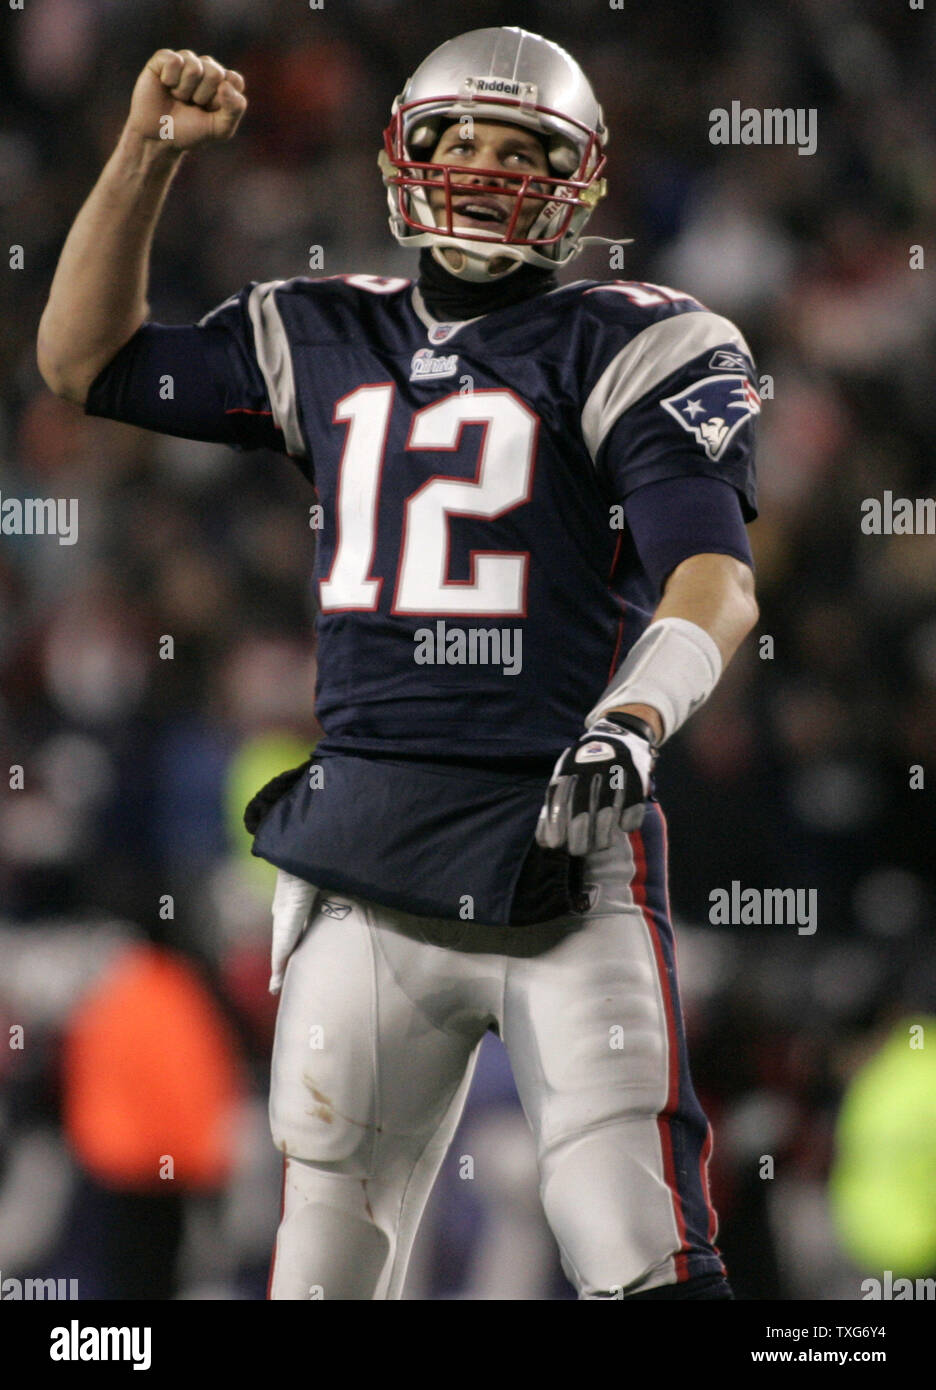 New England Patriots quarterback Tom Brady celebrates a touchdown against the New York Jets by teammate BenJarvus Green-Ellis in the fourth quarter at Gillette Stadium in Foxboro, Massachusetts on December 6, 2010.  The Patriots defeated the Jets 45-3.    UPI/Matthew Healey Stock Photo